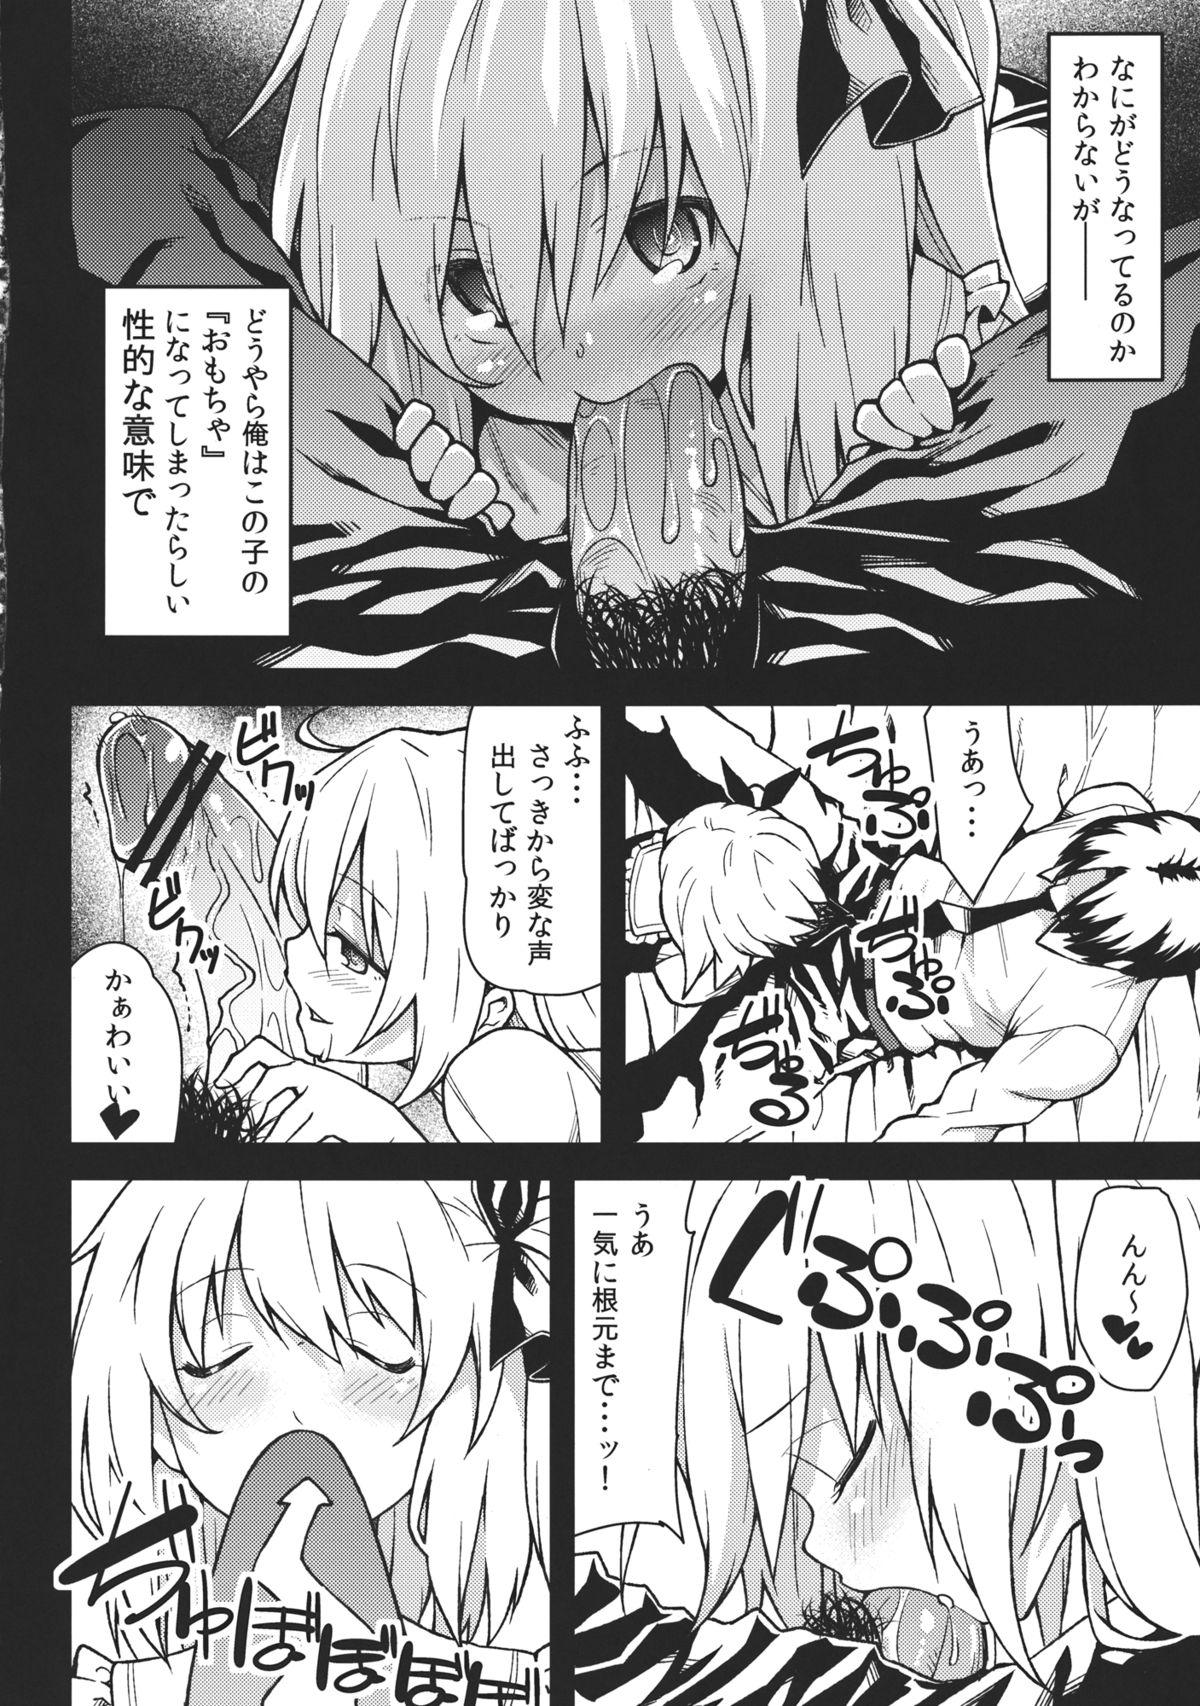 Inked Flan no Omocha - Touhou project Girl Girl - Page 4